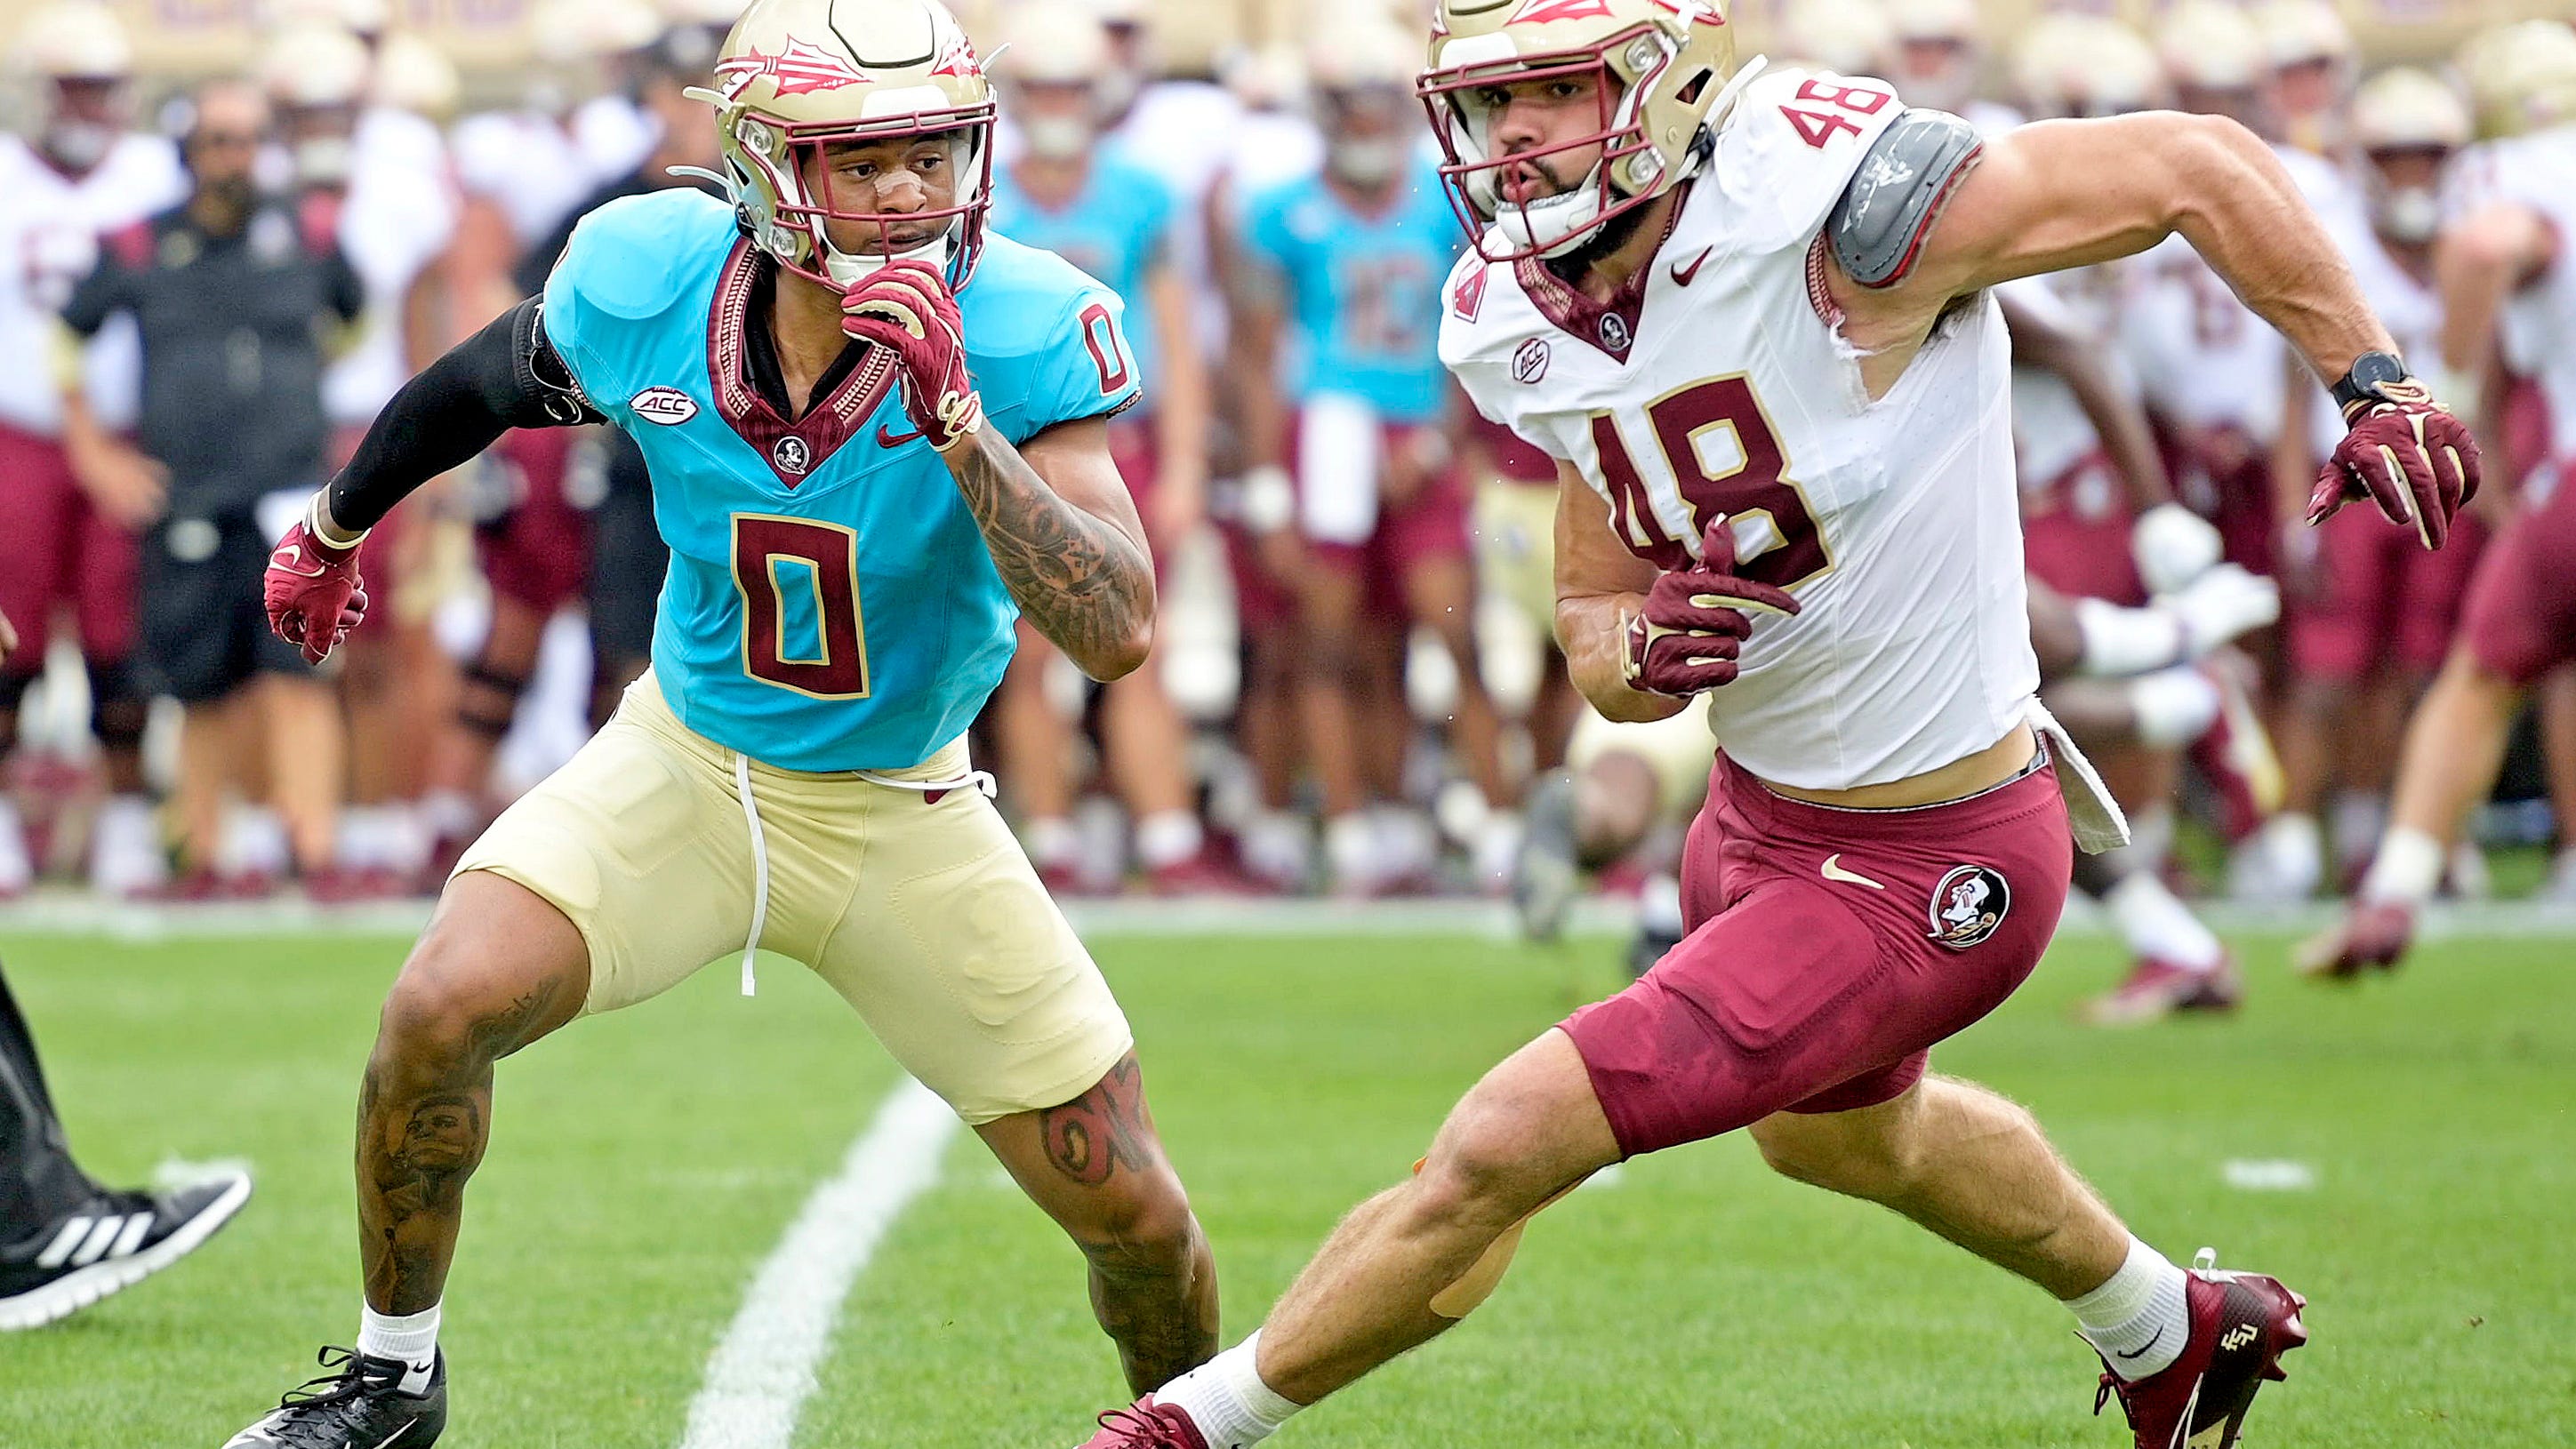  Recap: Rushing effort stands out in FSU football's annual Spring Showcase 